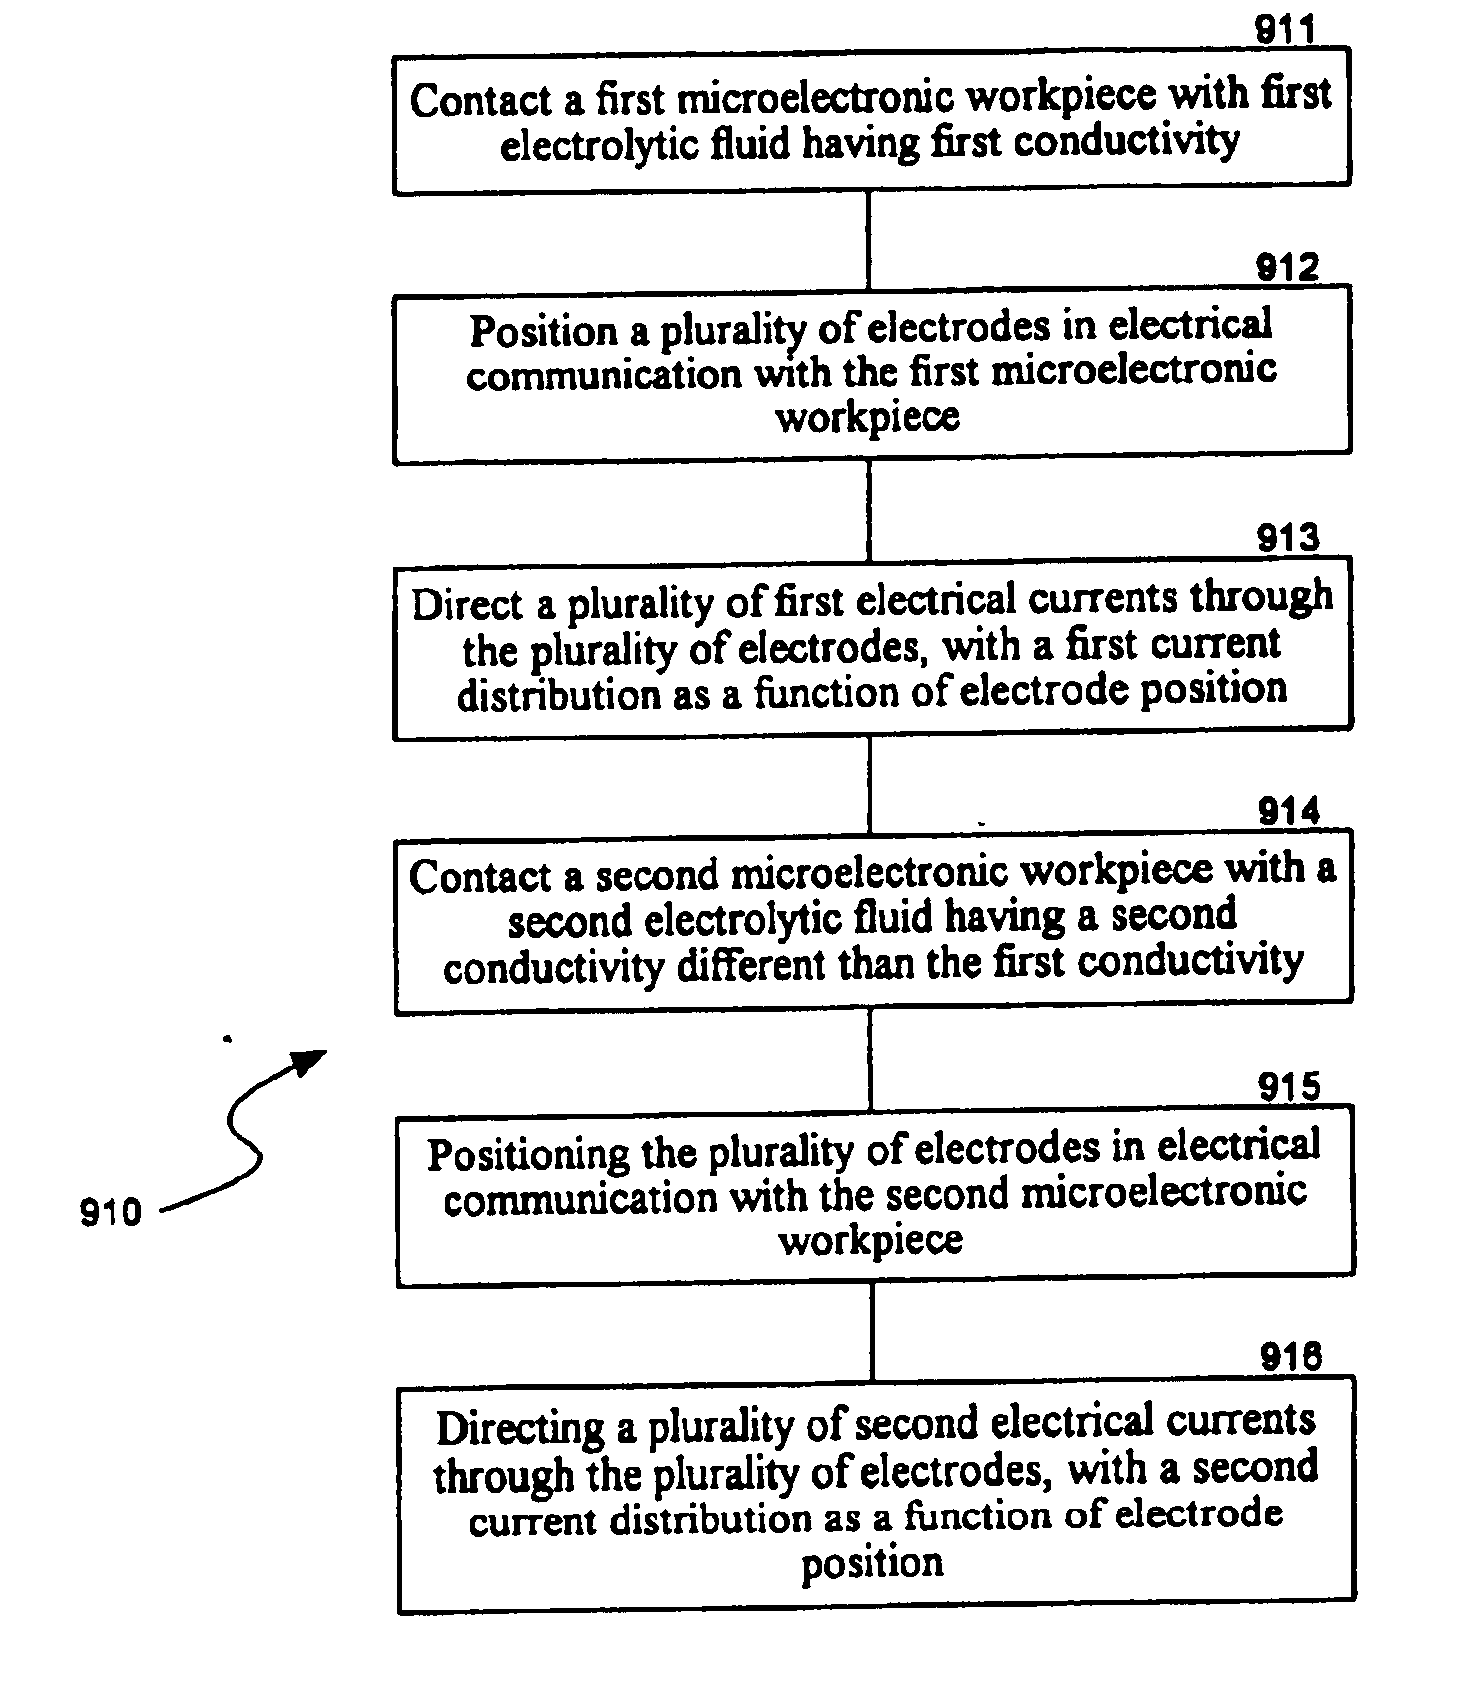 Method and systems for controlling current in electrochemical processing of microelectronic workpieces